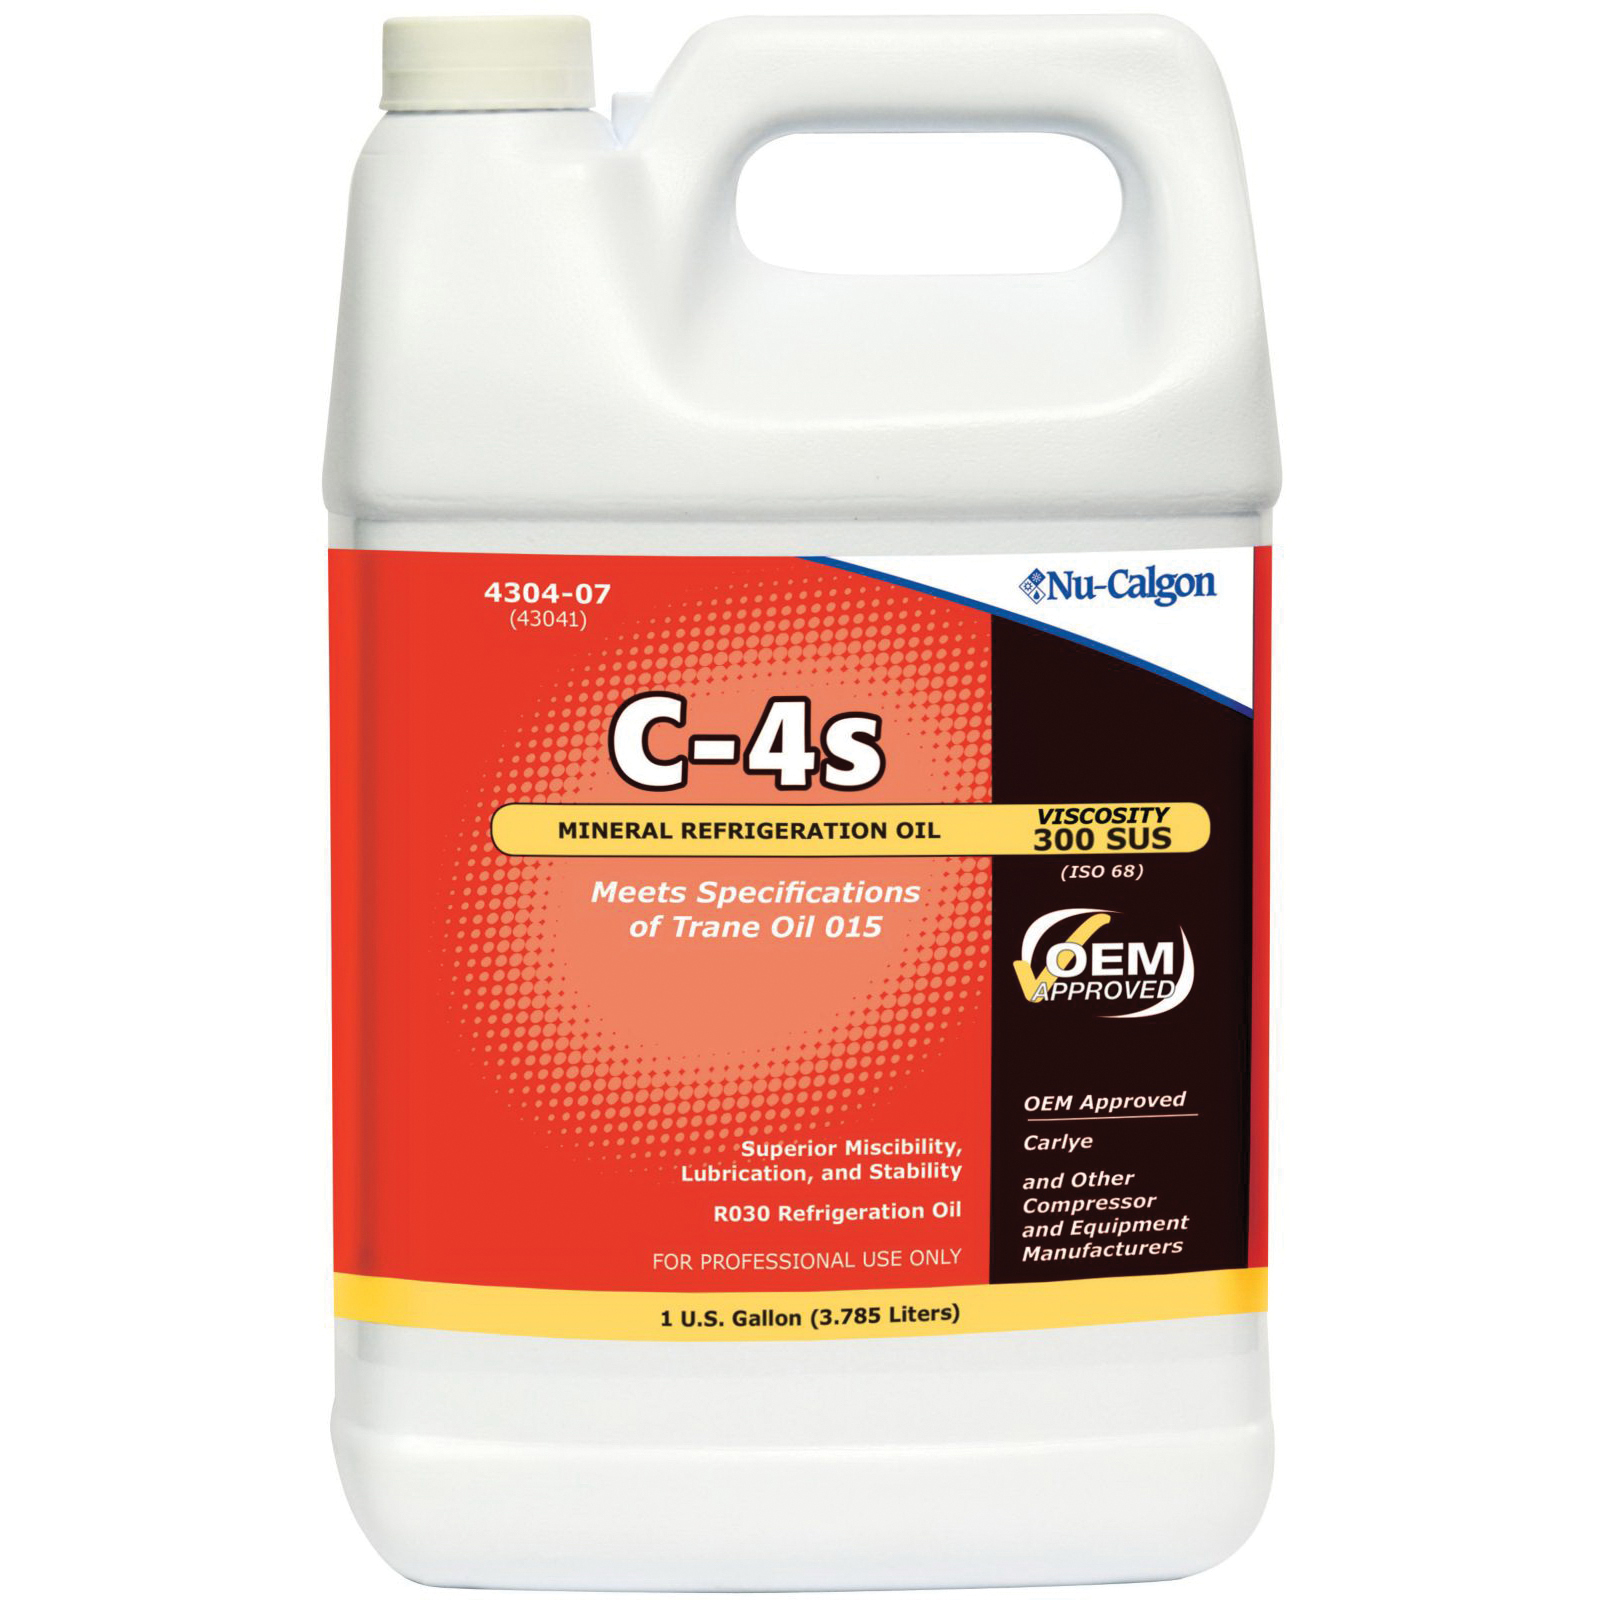 Nu-Calgon 4304-07 Refrigeration Mineral Oil, 1 gal, Bottle, Colorless to Light Yellow, Hydrocarbon